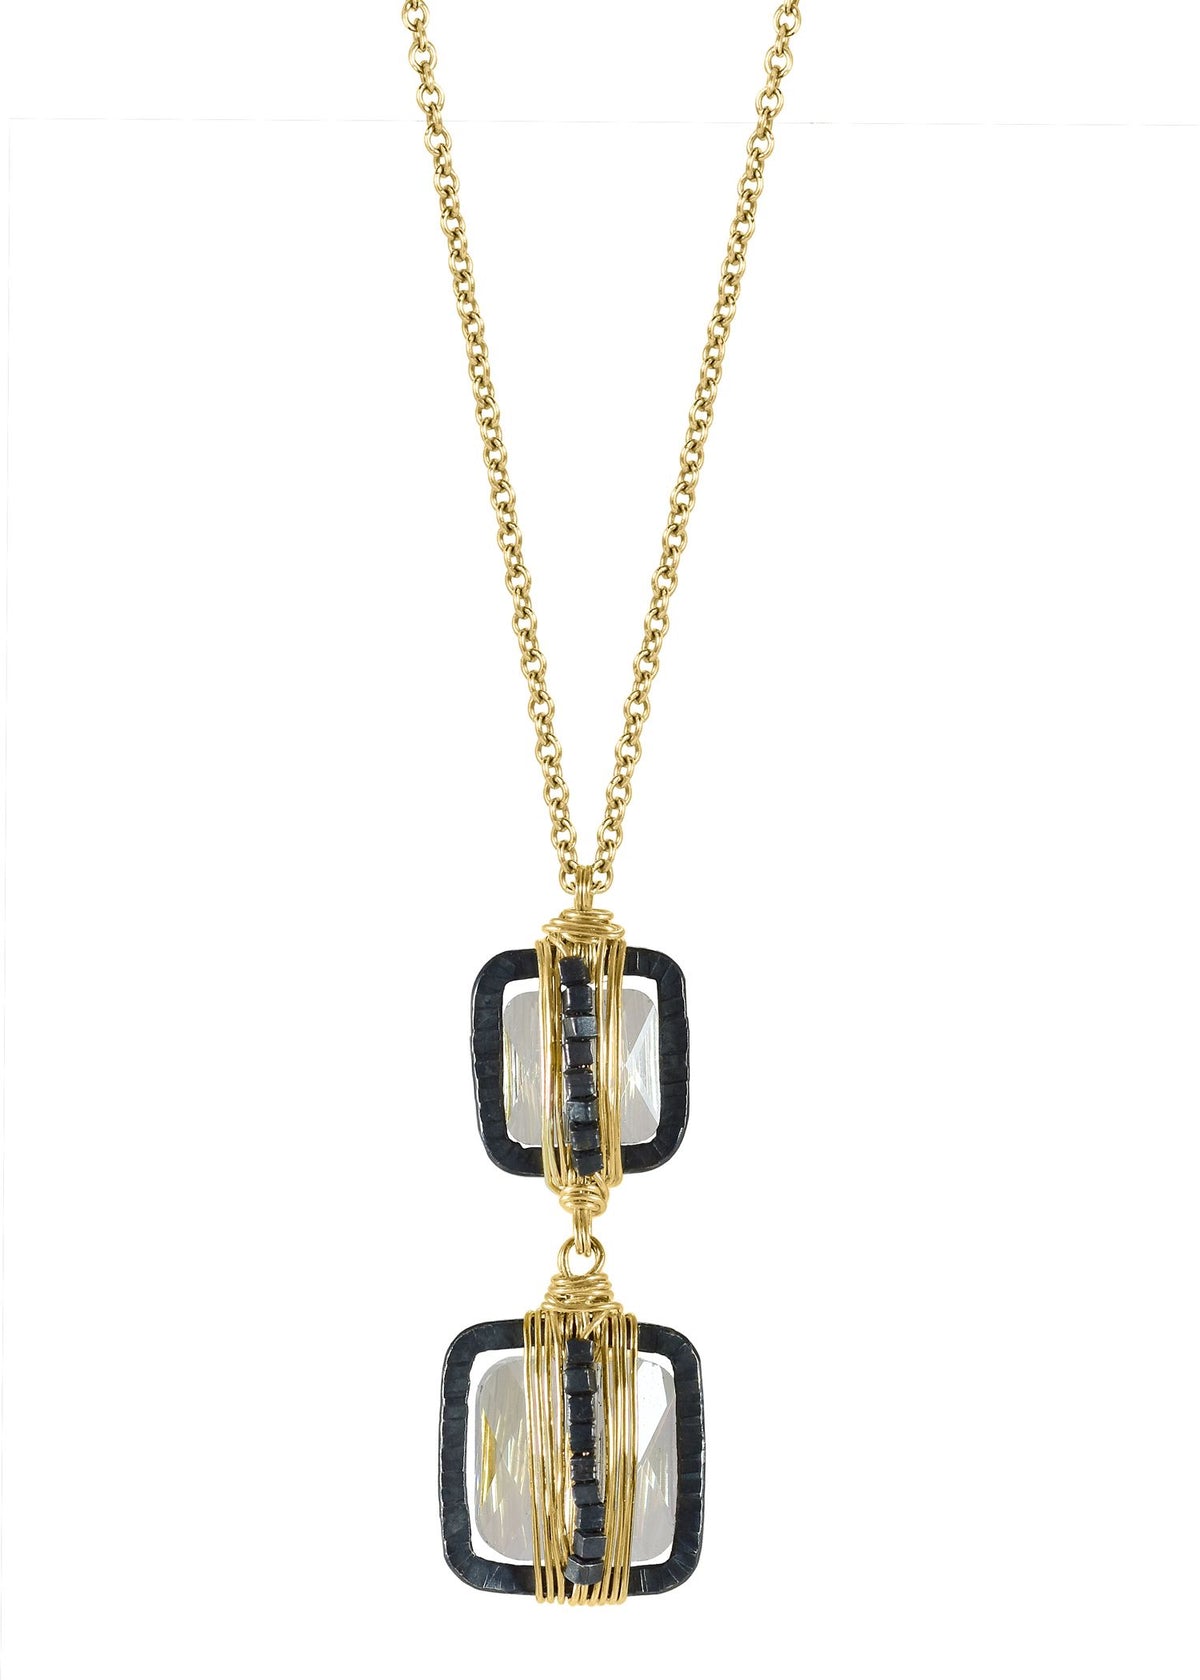 Crystal 14k gold fill Blackened sterling silver Mixed metal Necklace measures 17” in length Pendant measures 1” in length and 3/8” in width Handmade in our Los Angeles studio